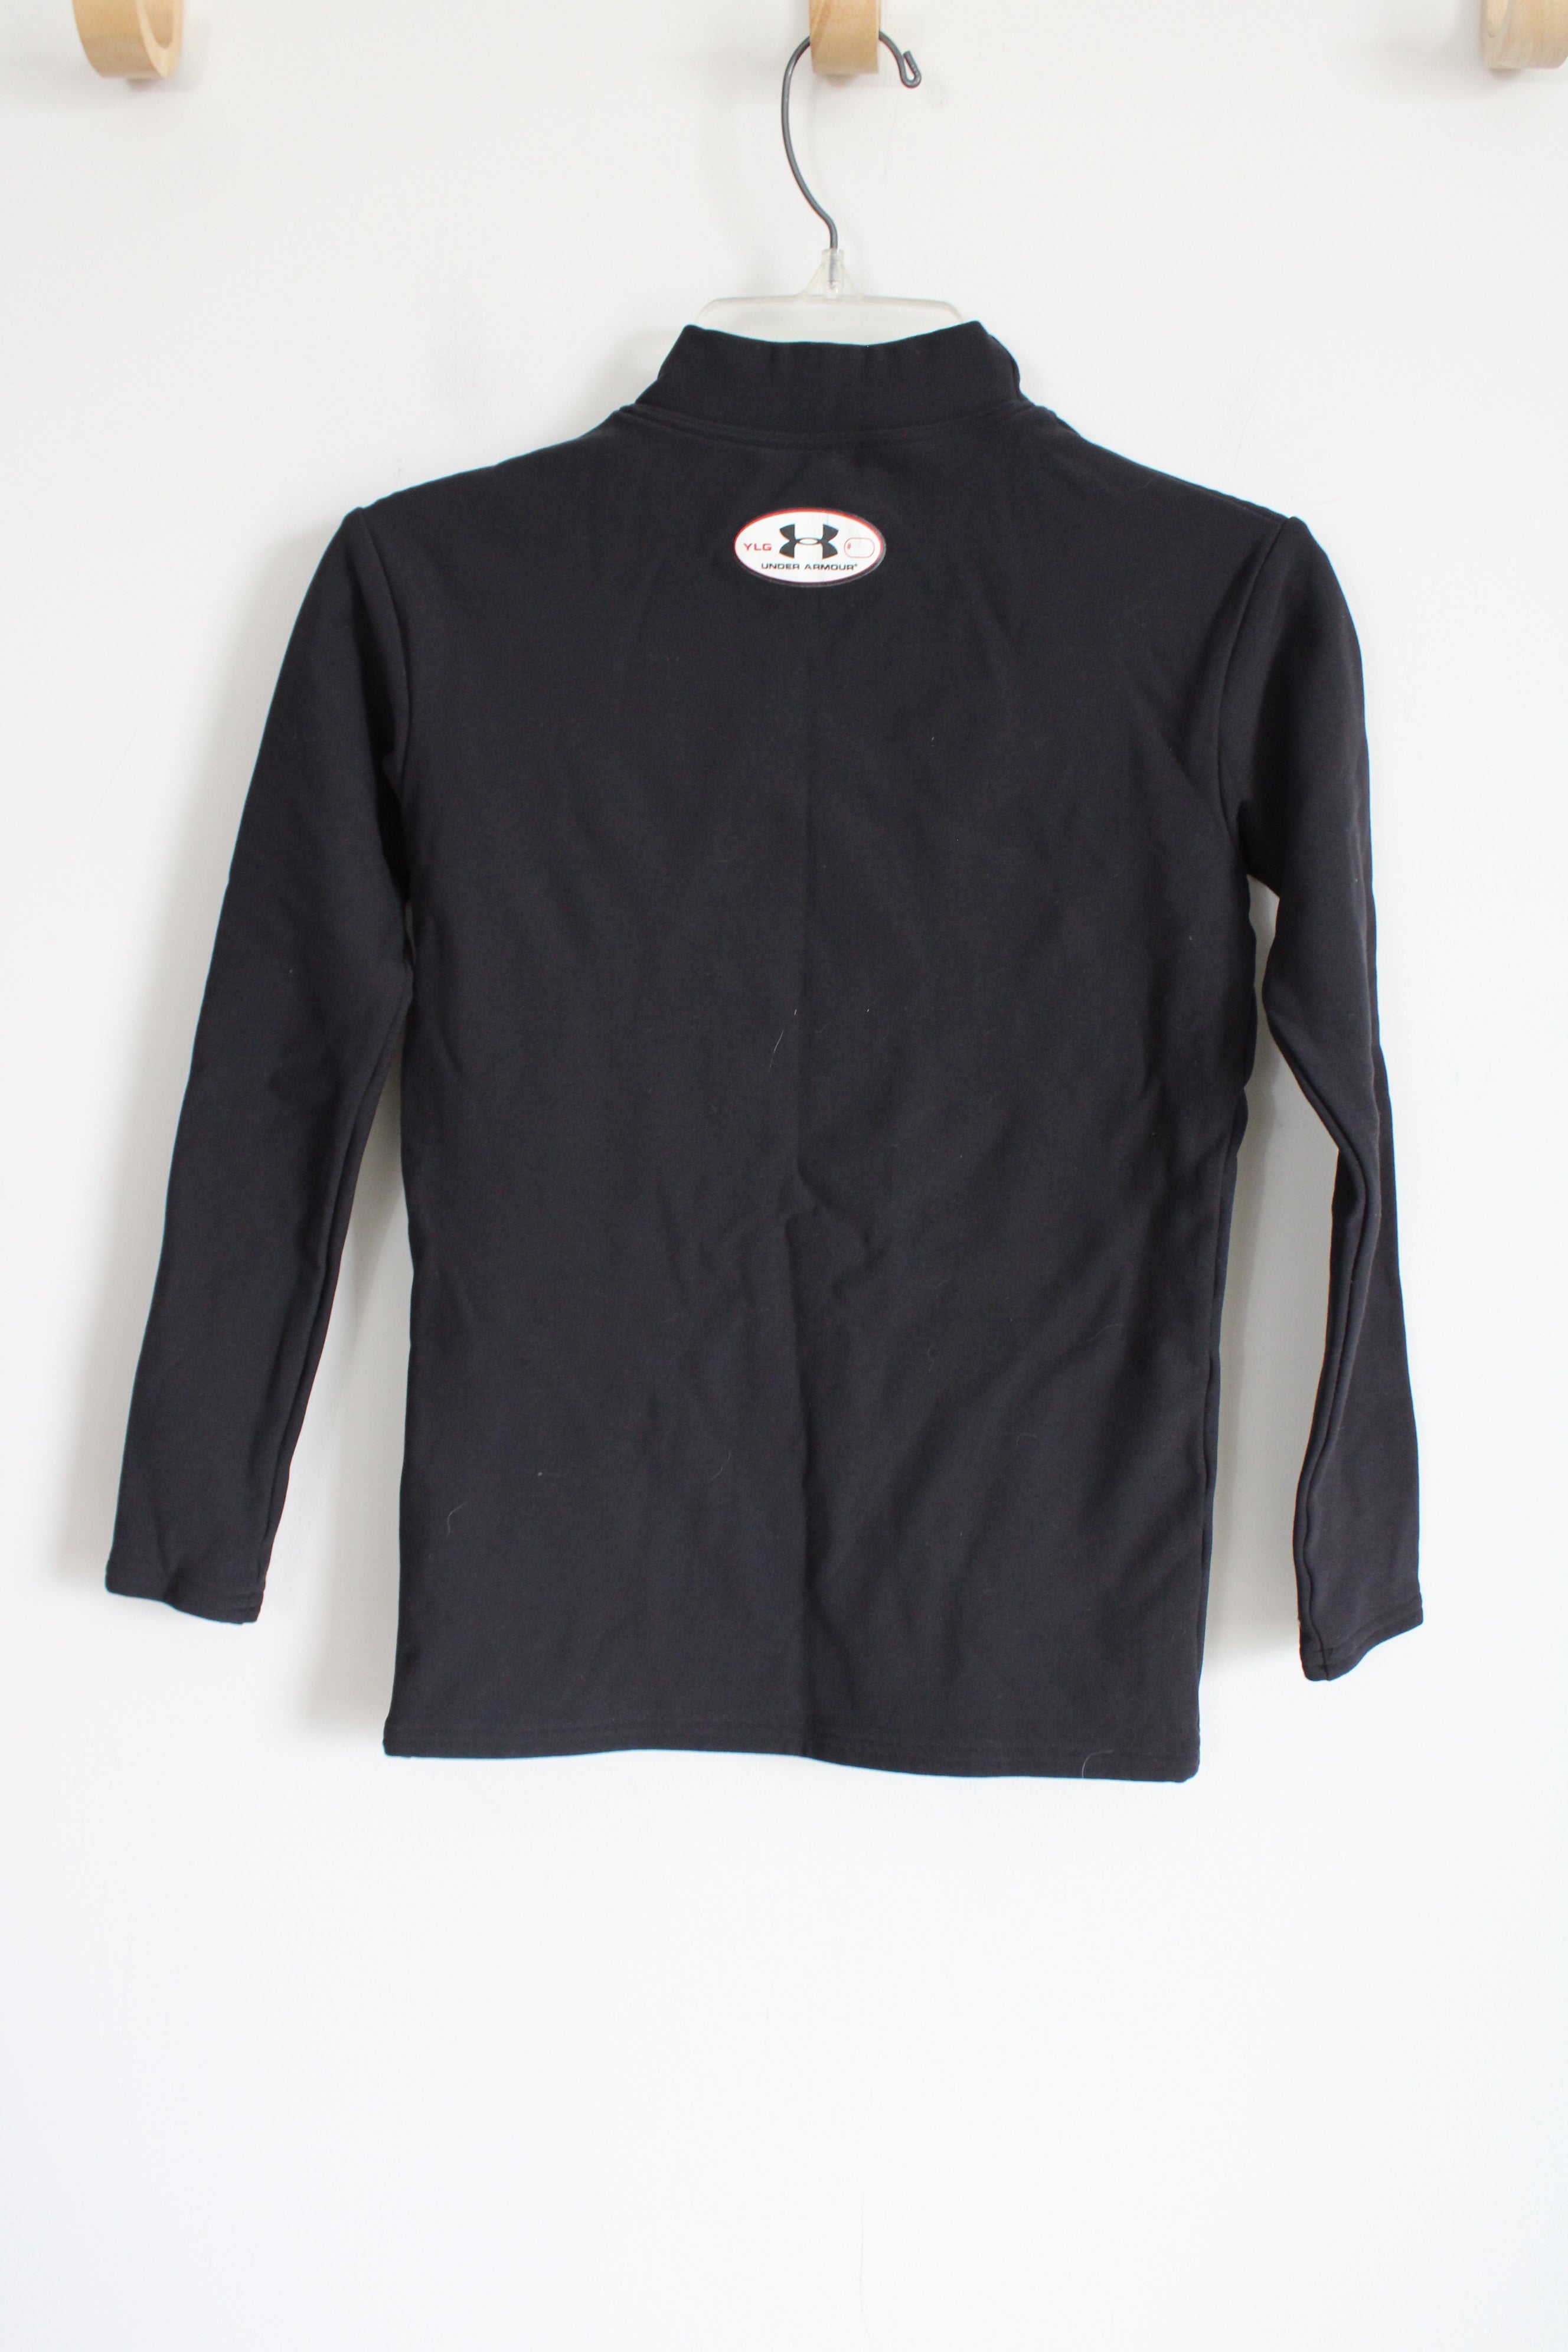 Under Armour Black Fleece Lined Mock Neck Shirt | Youth L (14/16)